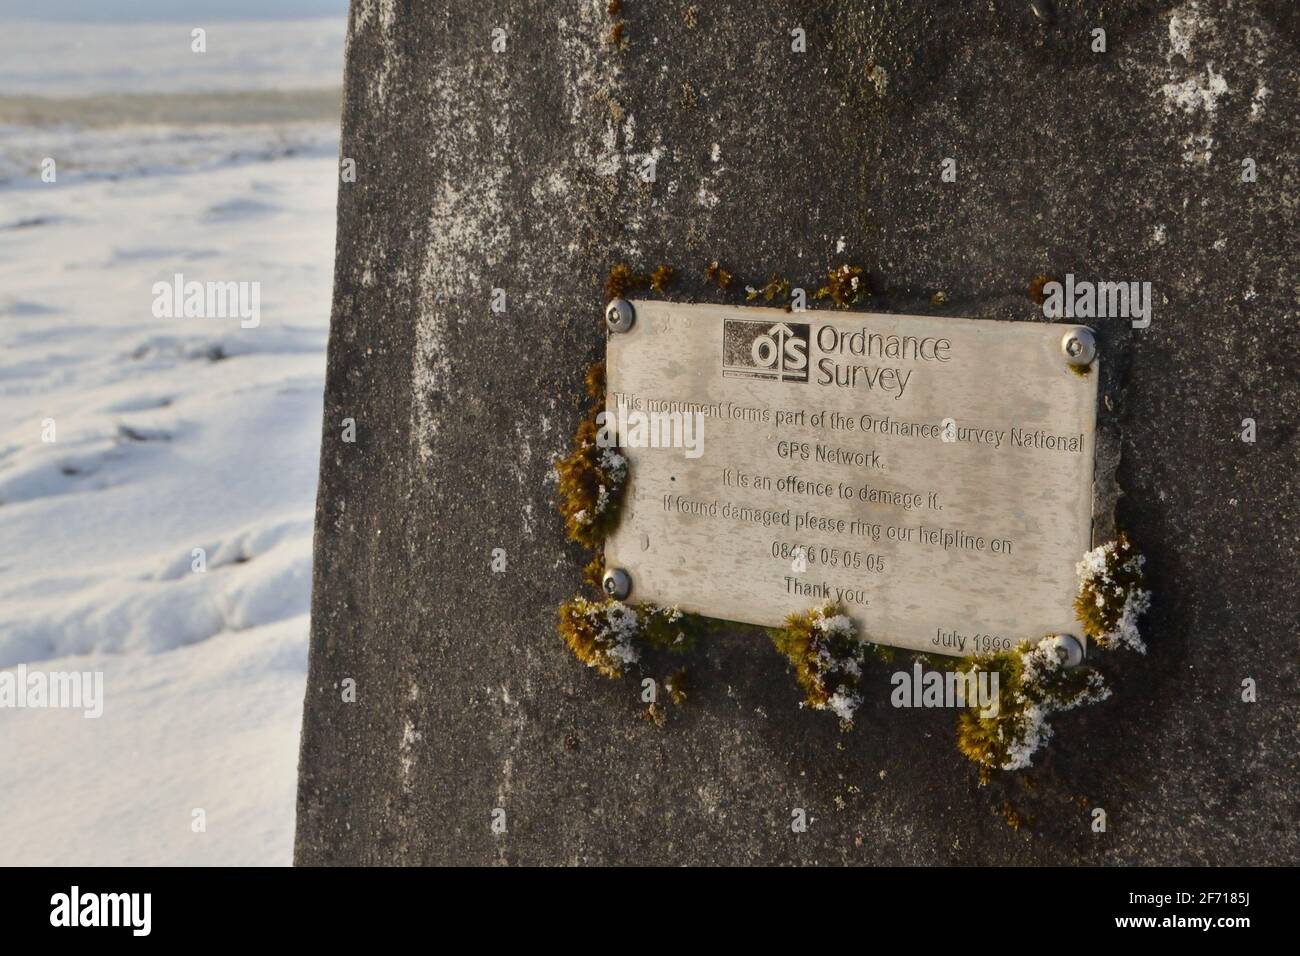 A plaque on a British Ordnance Survey trig point, stating that the trig point is part of the national GPS network, Scottish Highlands, UK. Stock Photo